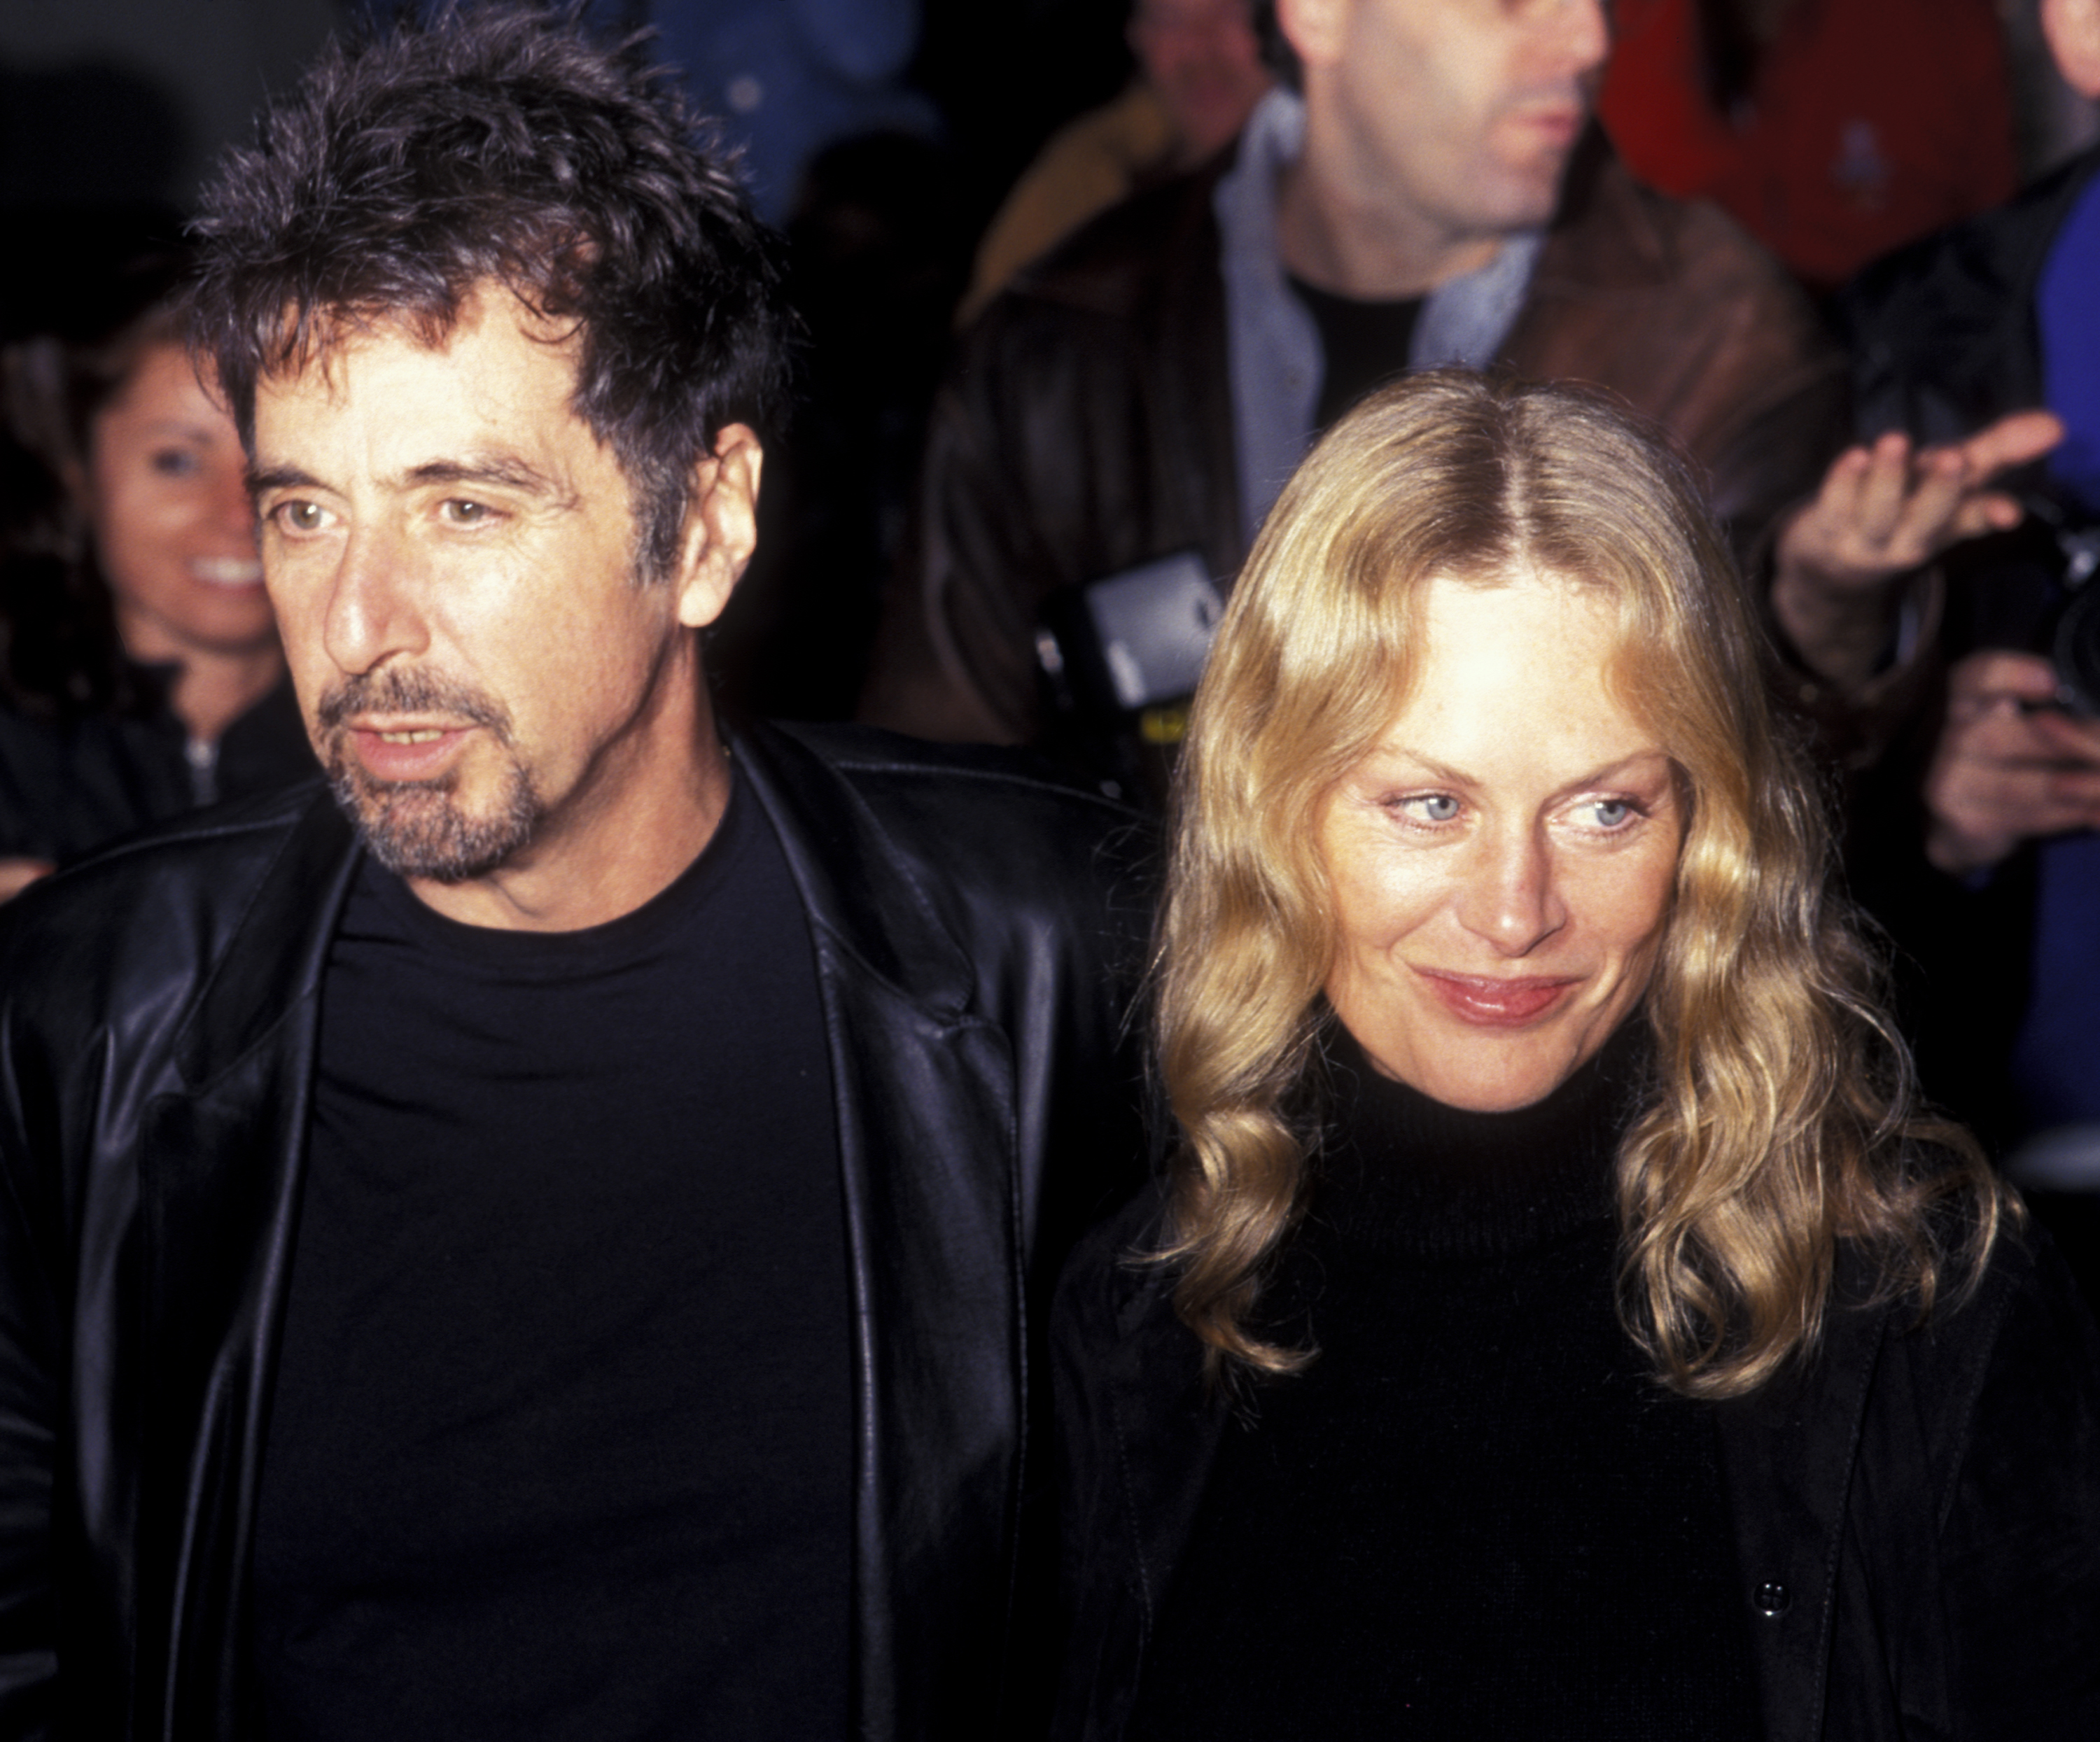 Actor Al Pacino and Beverly D'Angelo attend the premiere party for "The Insider" on November 1, 1999 at the Ziegfeld Theater in New York City | Source: Getty Images